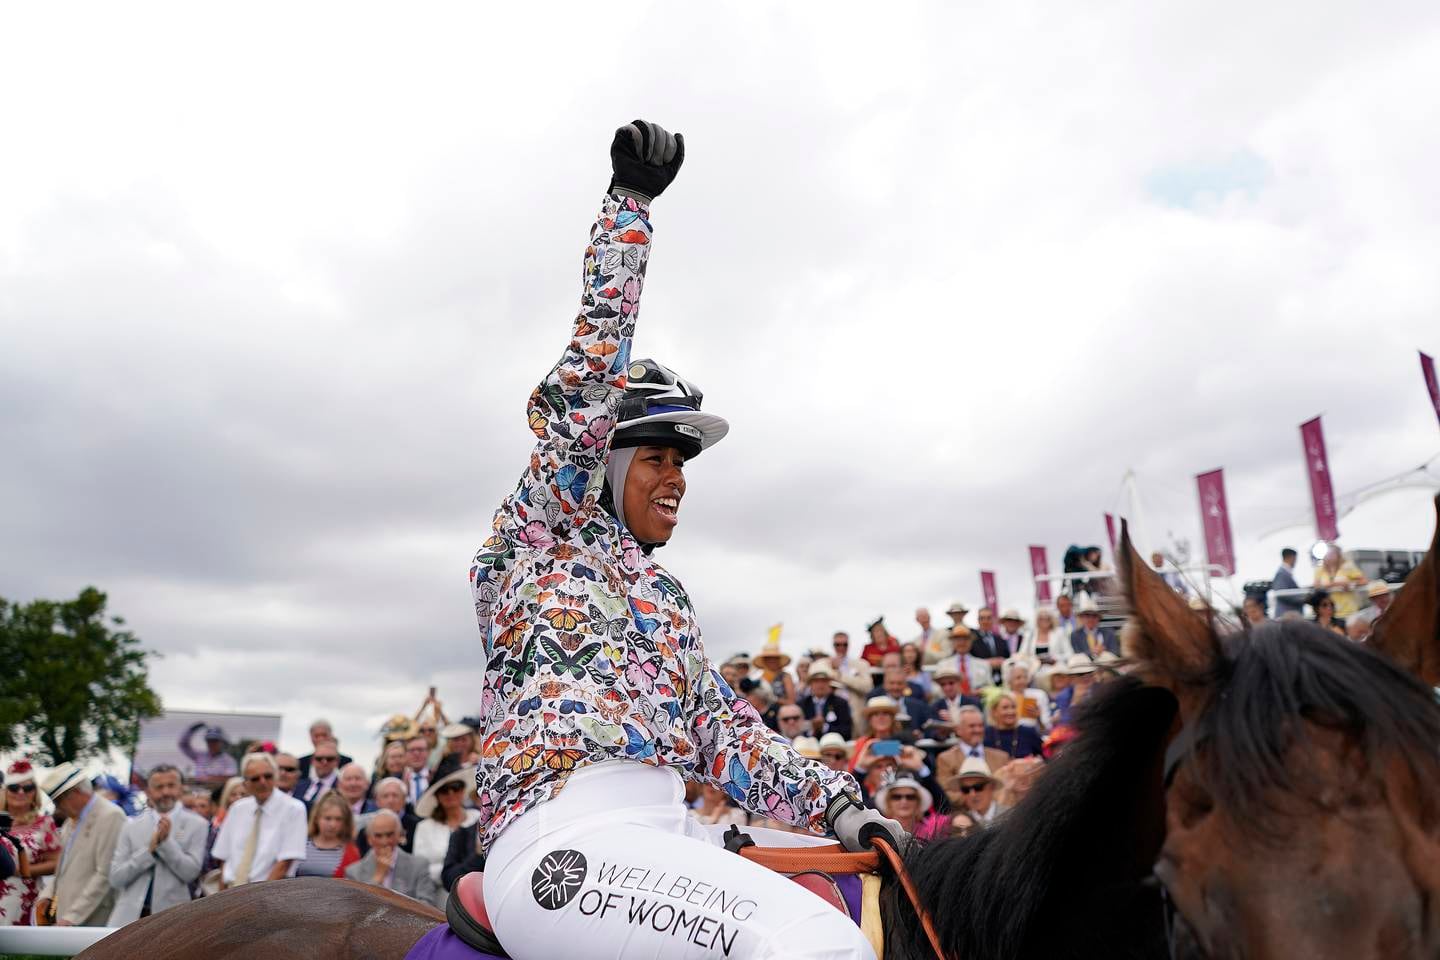 CHICHESTER, ENGLAND - AUGUST 01: Khadijah Mellah riding Haverland  win The Magnolia Cup The Goodwood Ladies' Race at Goodwood Racecourse on August 01, 2019 in Chichester, England. (Photo by Alan Crowhurst/Getty Images)